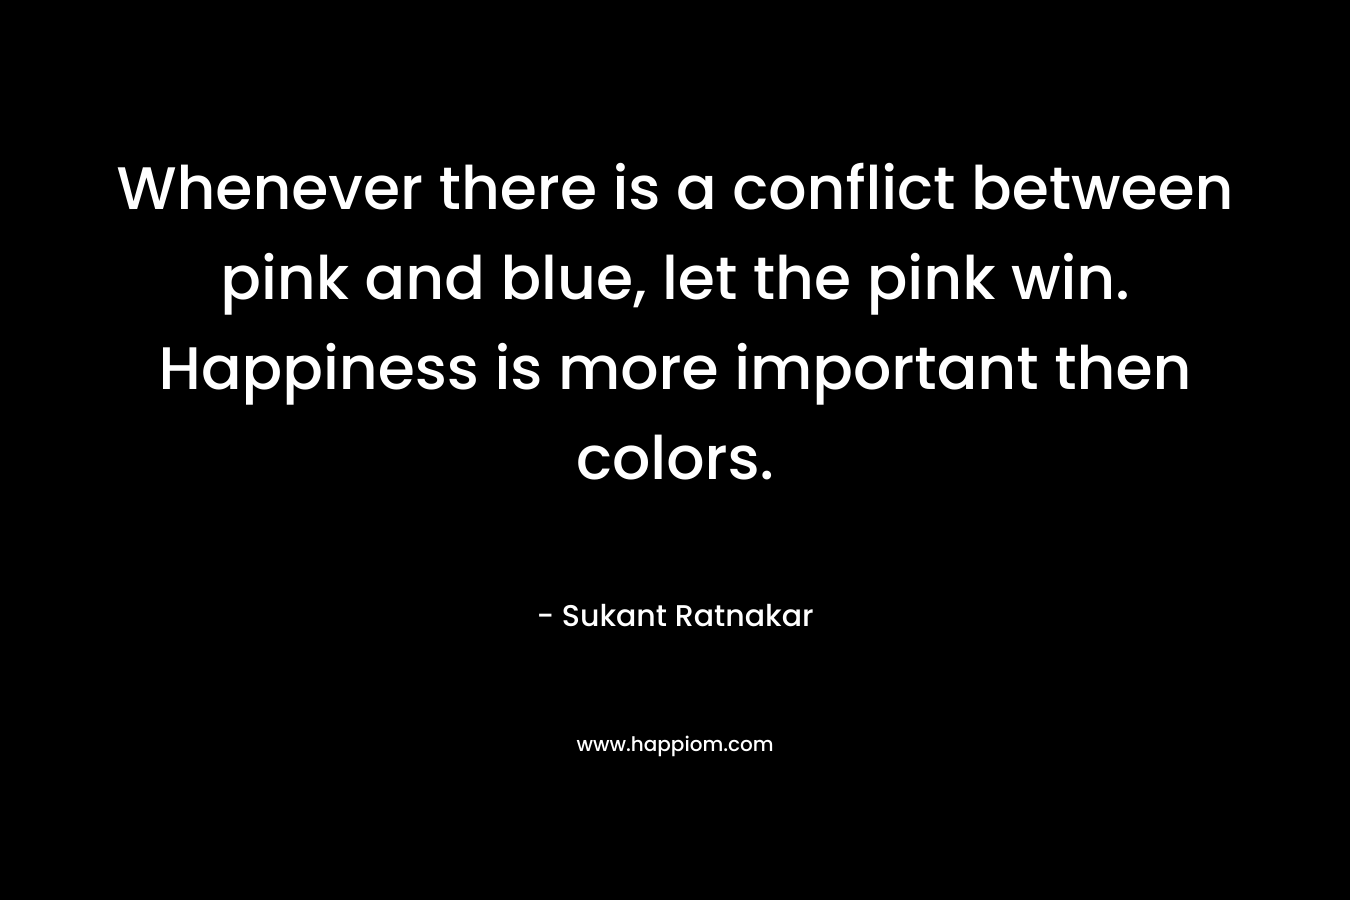 Whenever there is a conflict between pink and blue, let the pink win. Happiness is more important then colors.